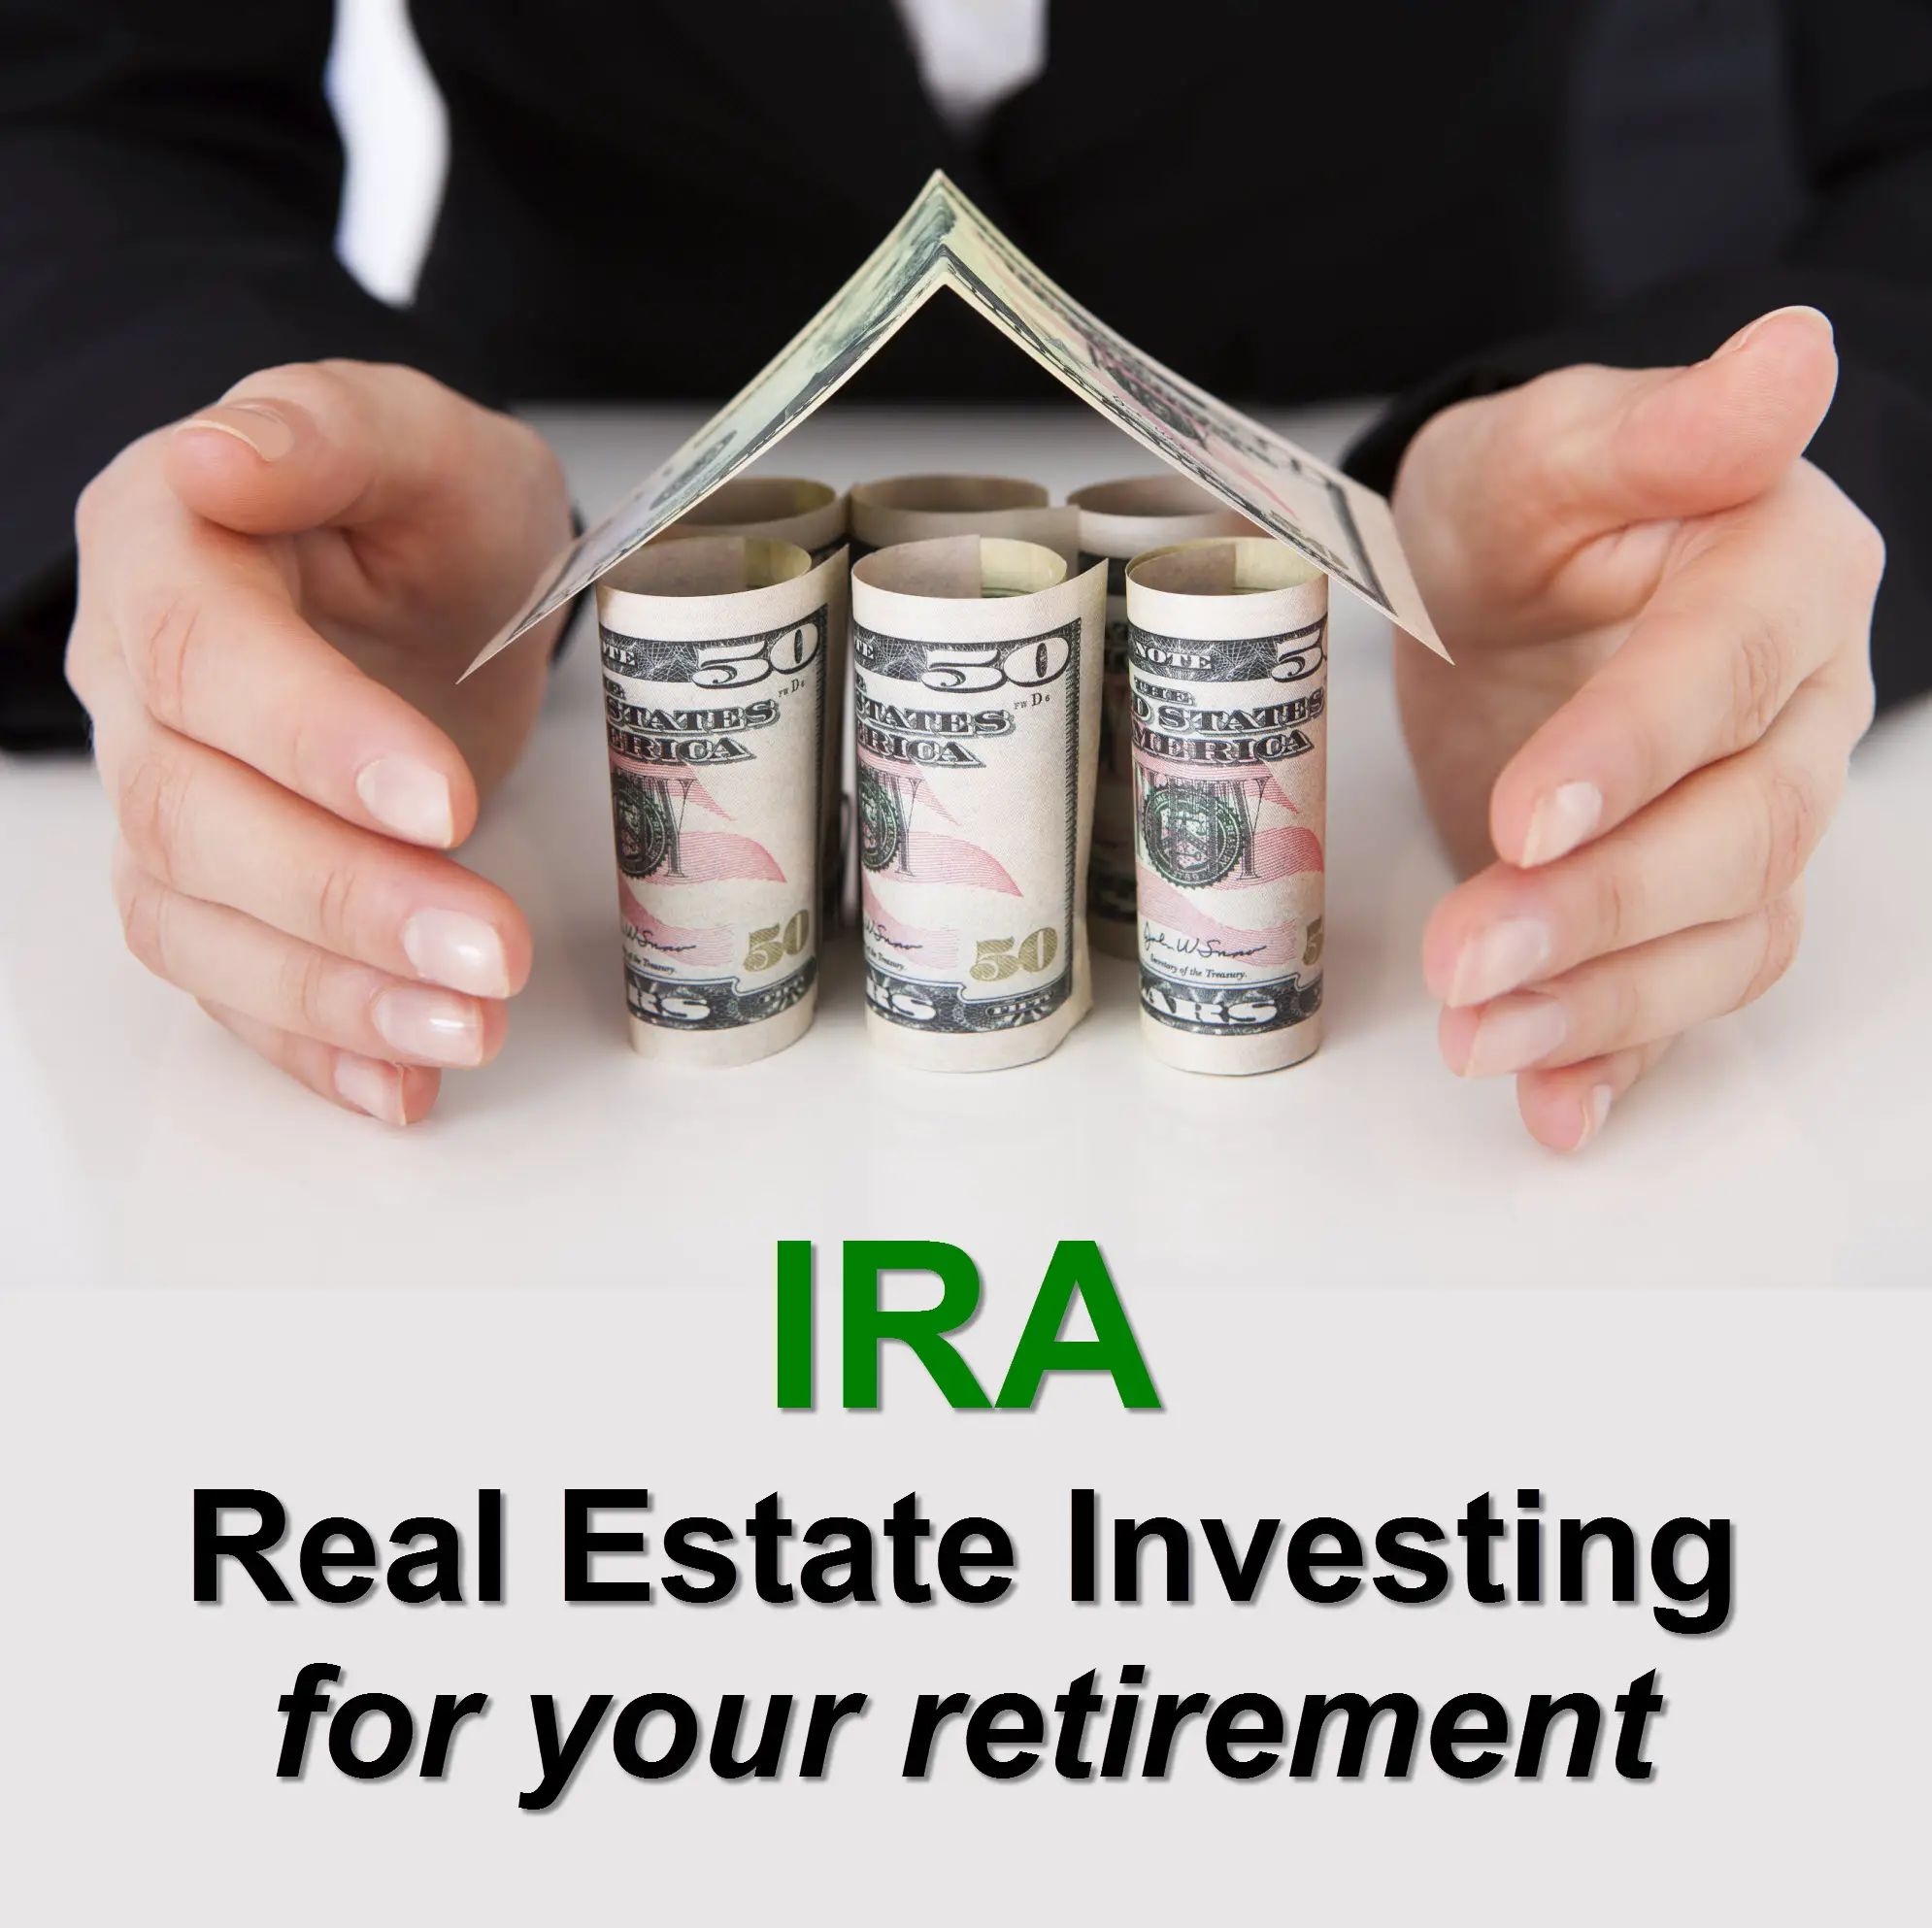 Investing in Real Estate using a Self